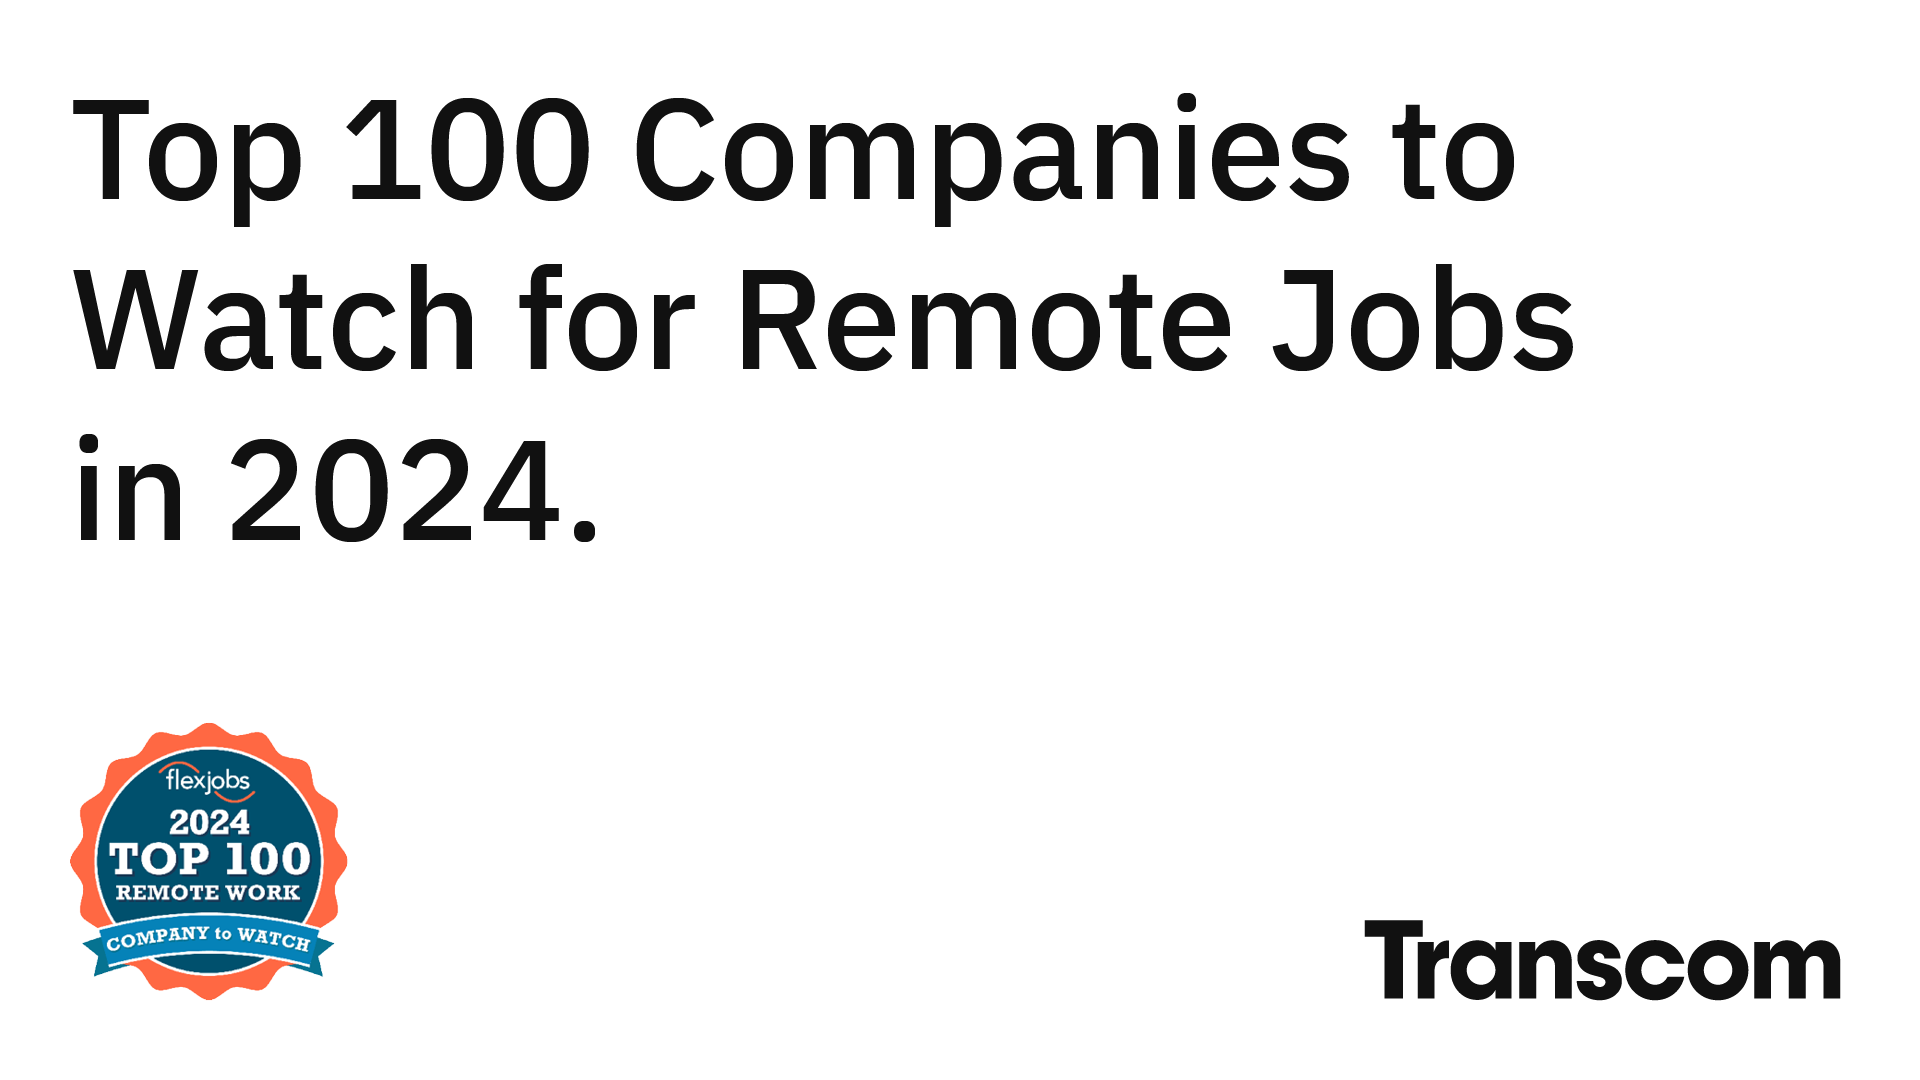 FlexJobs' Top 100 Companies to Watch for Remote Jobs